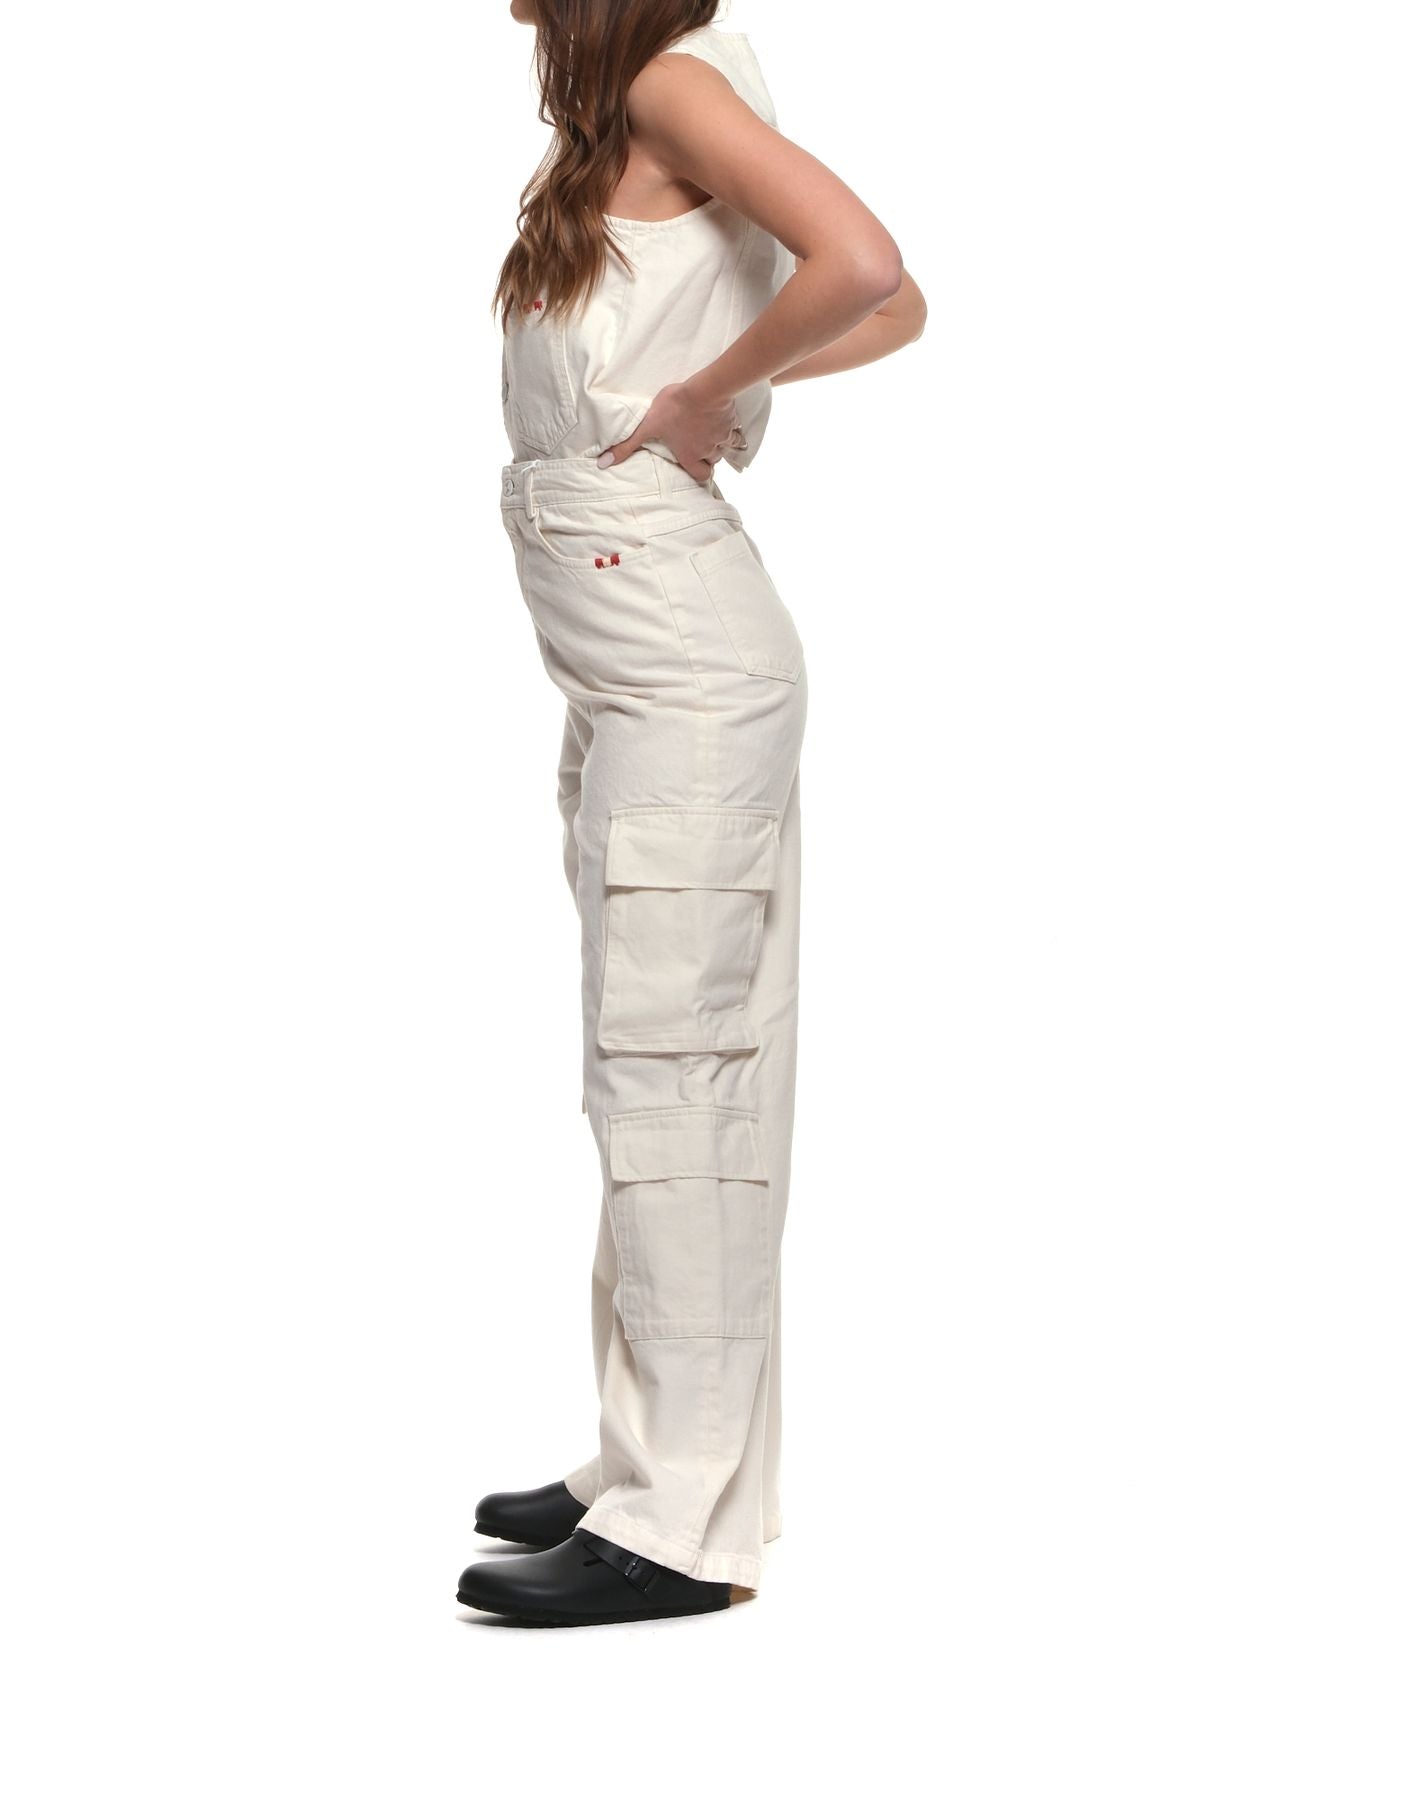 Jeans woman AMD065P3200111 WHITE Amish